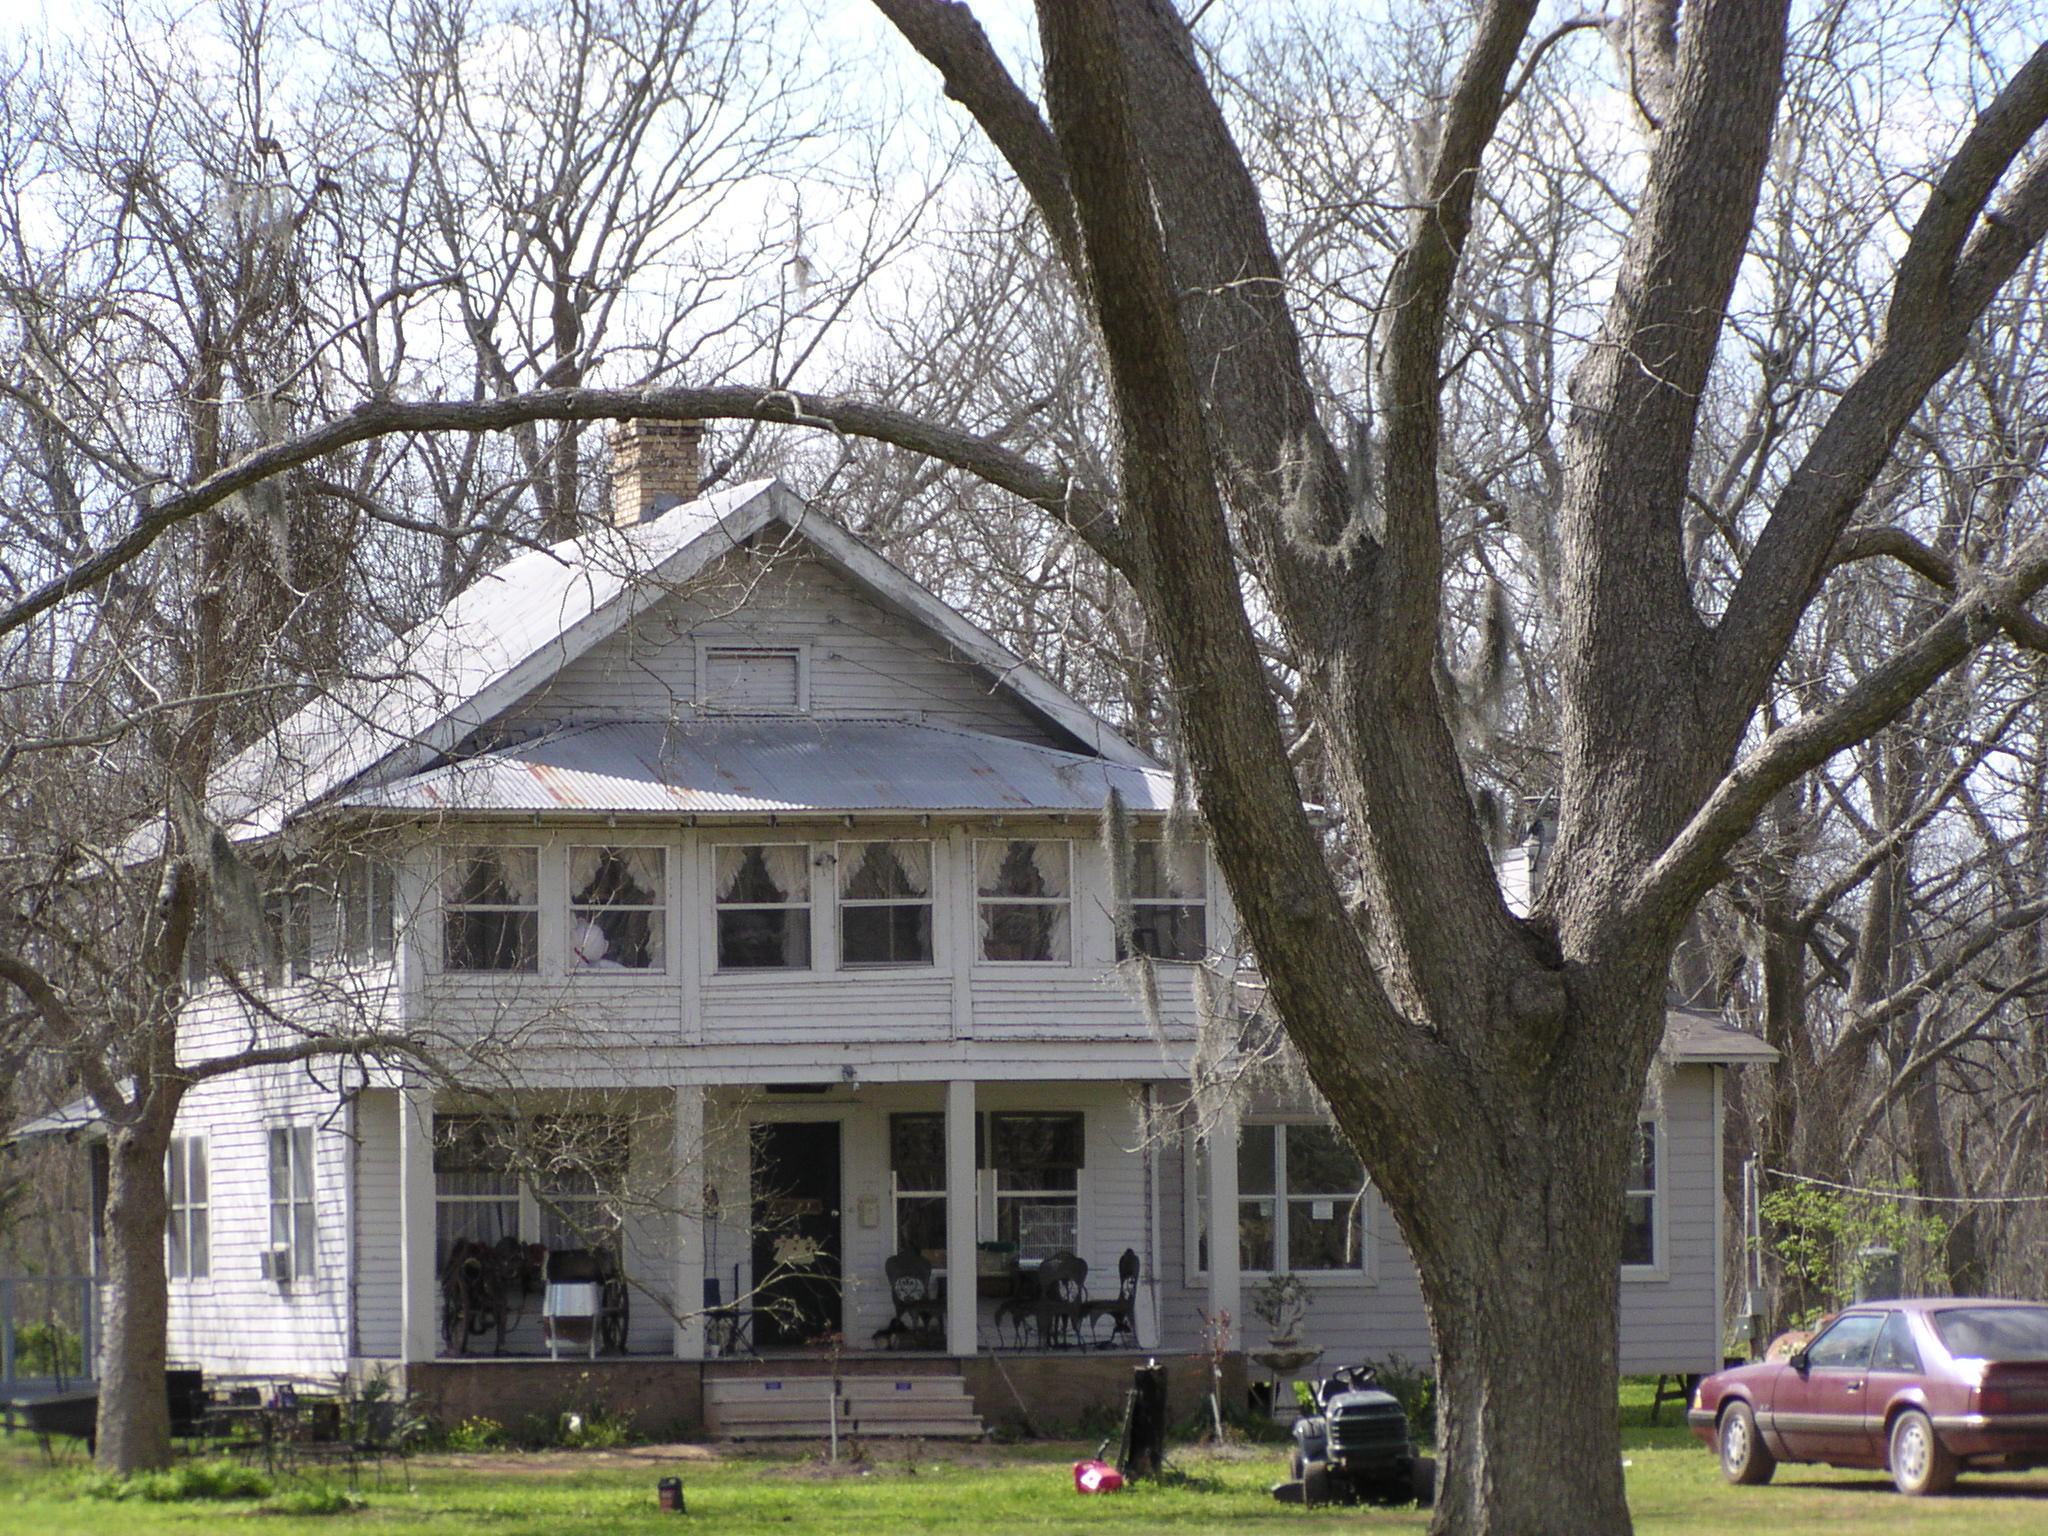 The Miller House was built around 1900 near the Juliff cotton gin, featuring 6 small bedrooms.